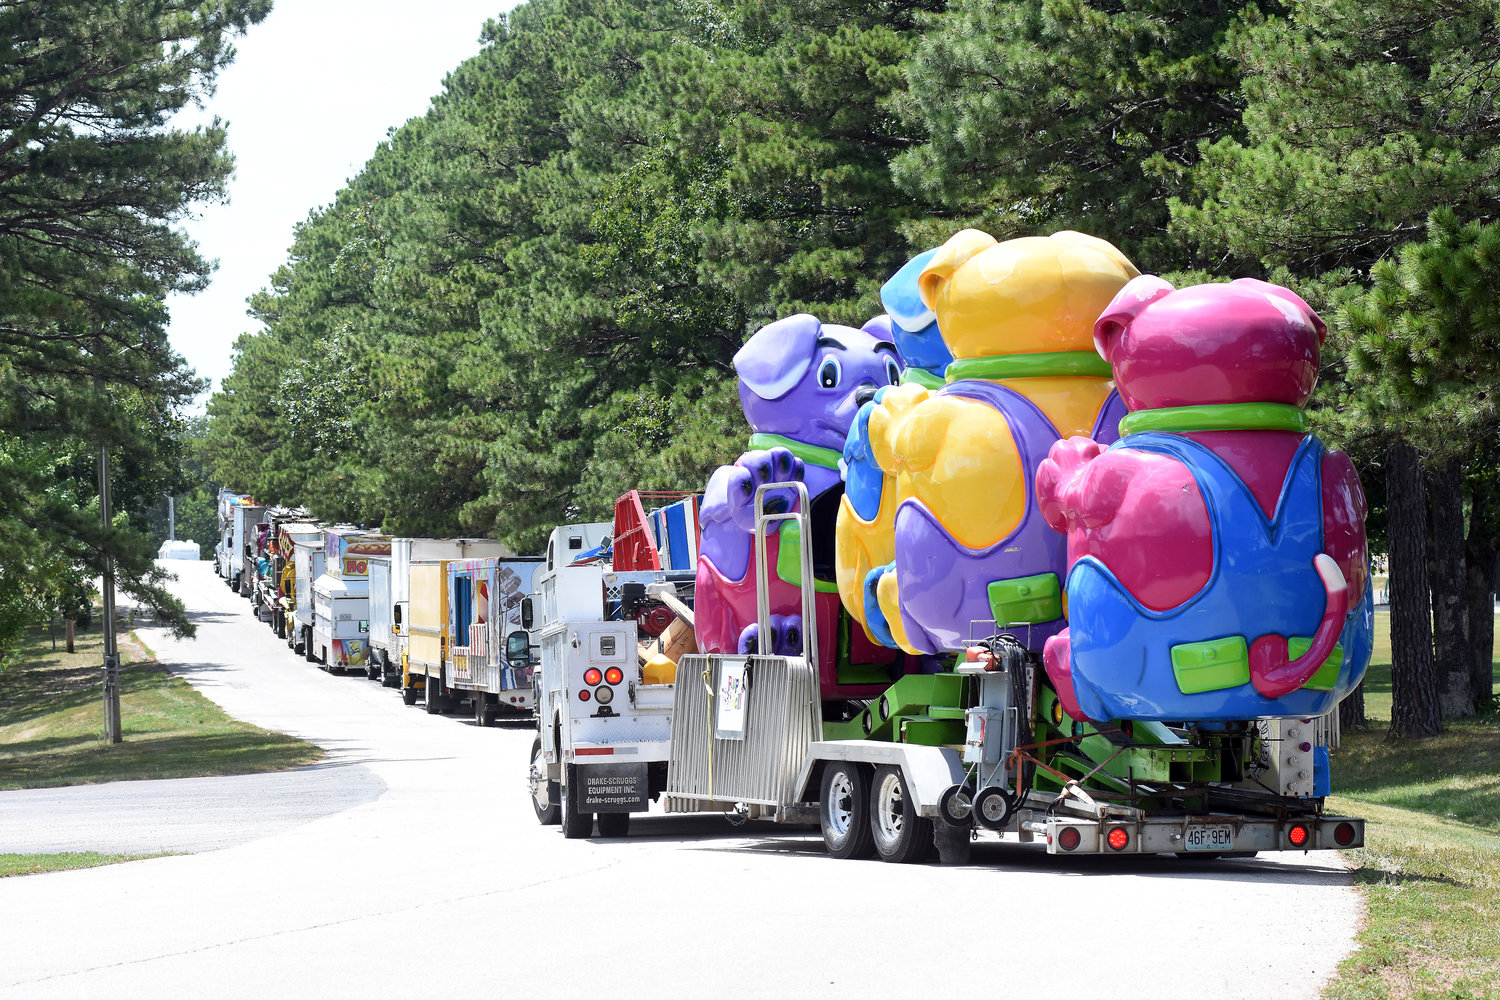 BIG C’s Enterprise carnival rides and support trailers arrived Sunday.